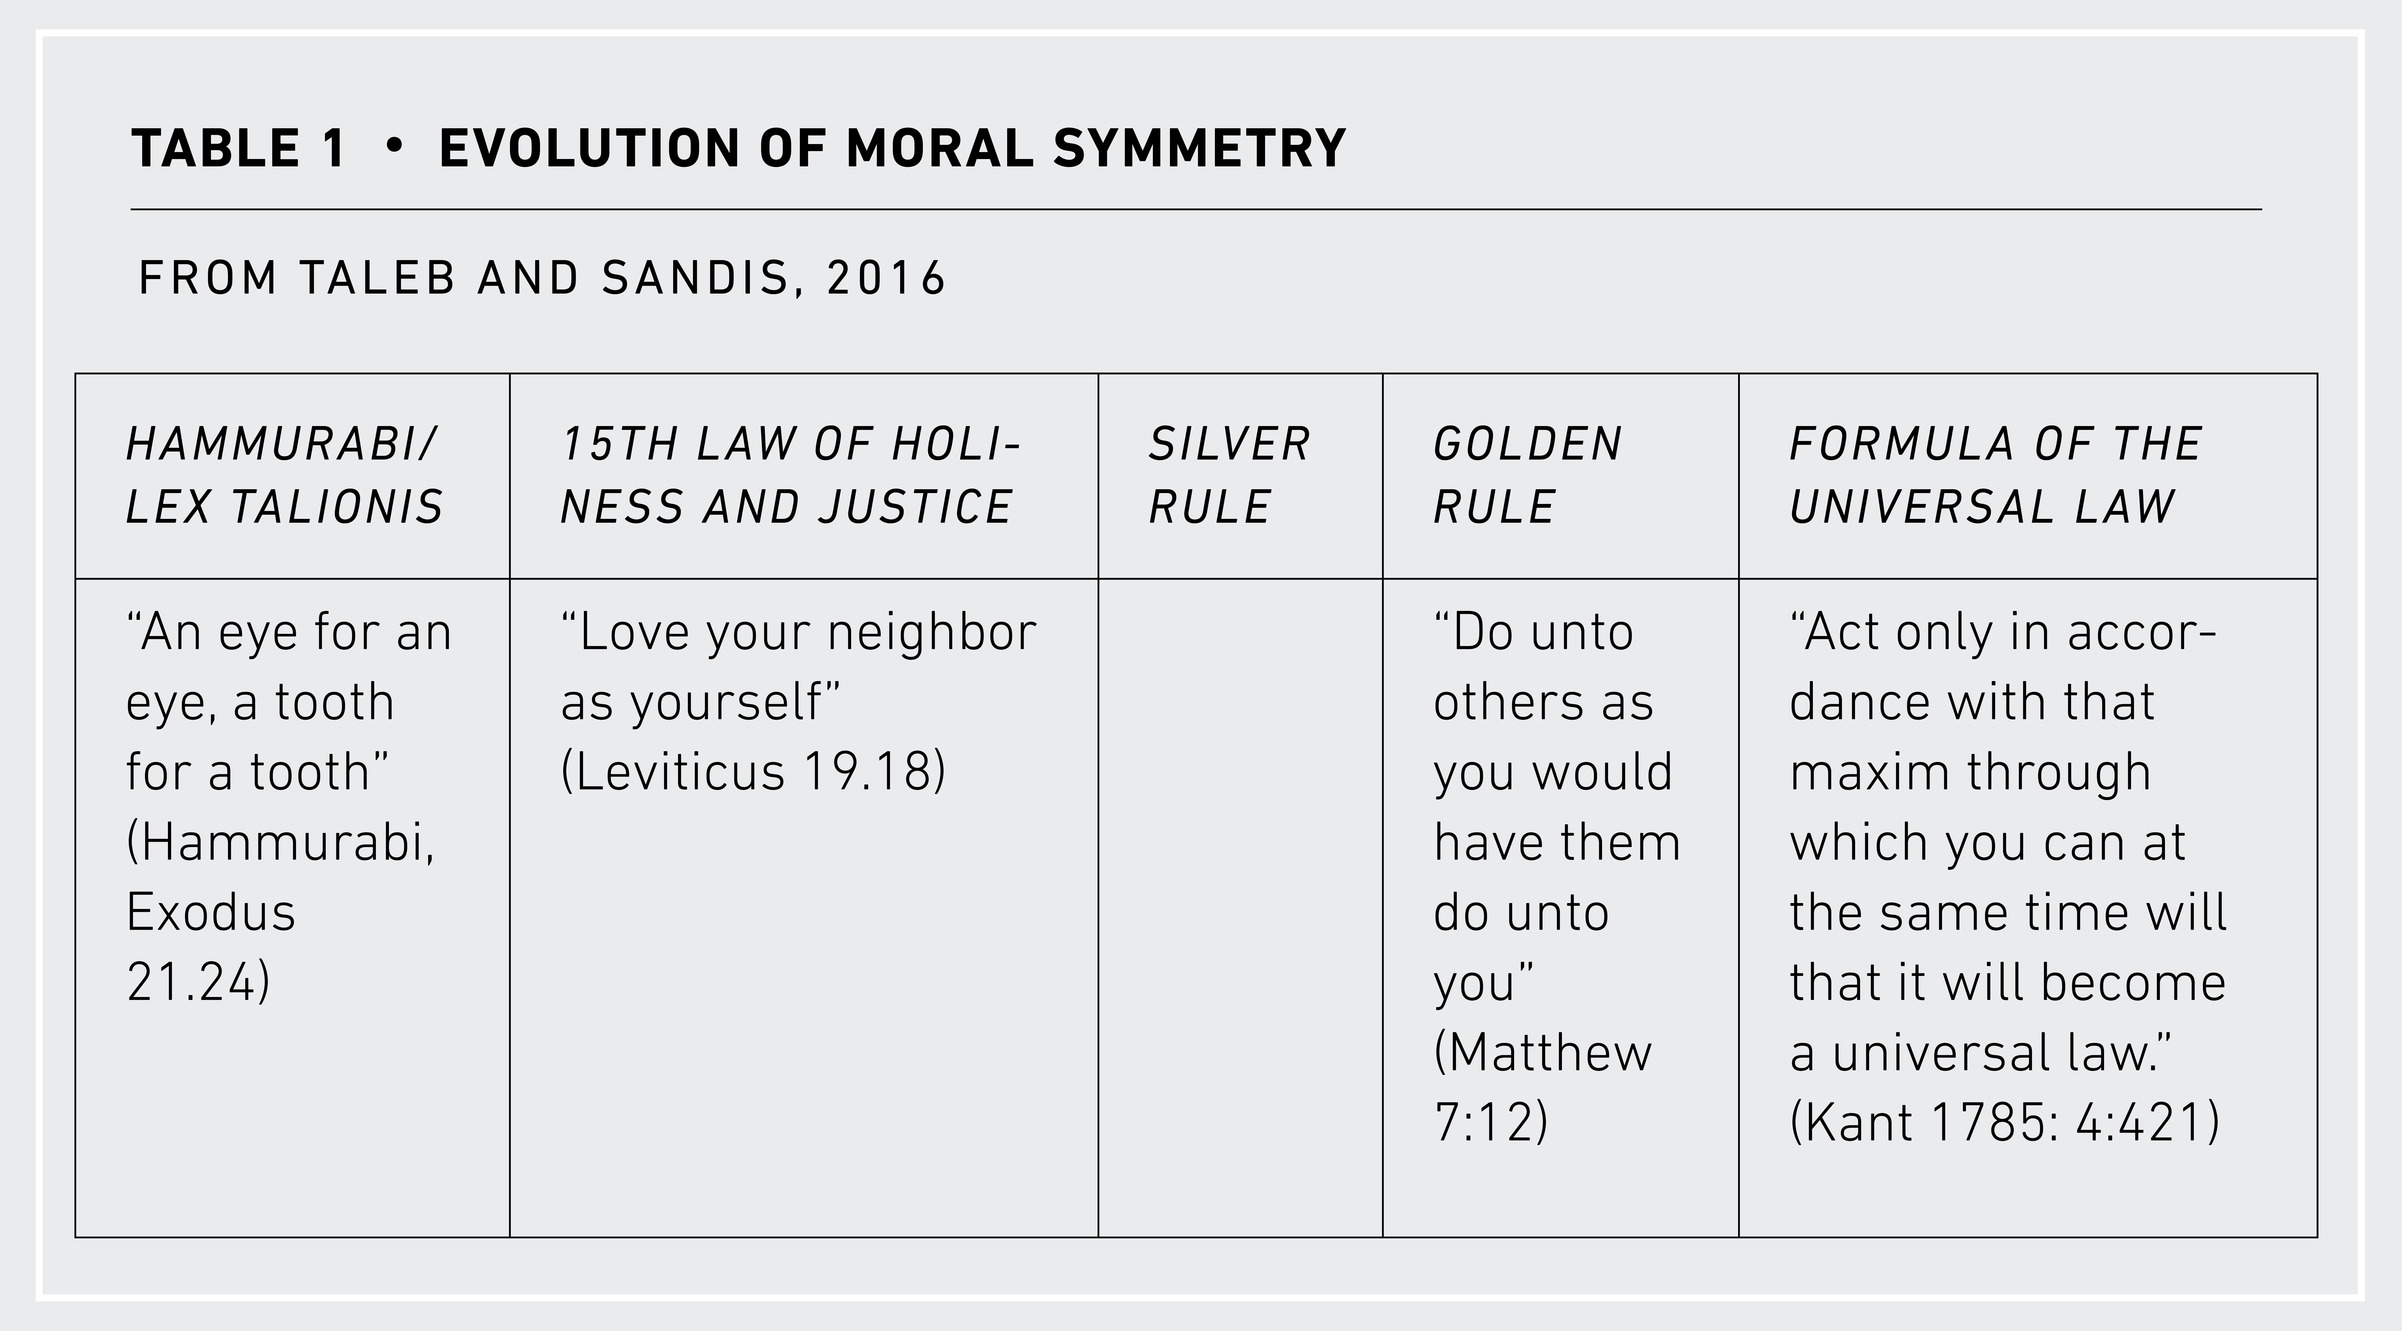 Table 1 •  Evolution of Moral Symmetry From Taleb and Sandis, 2016 Hammurabi/Lex Talionis 15th Law of Holiness and Justi